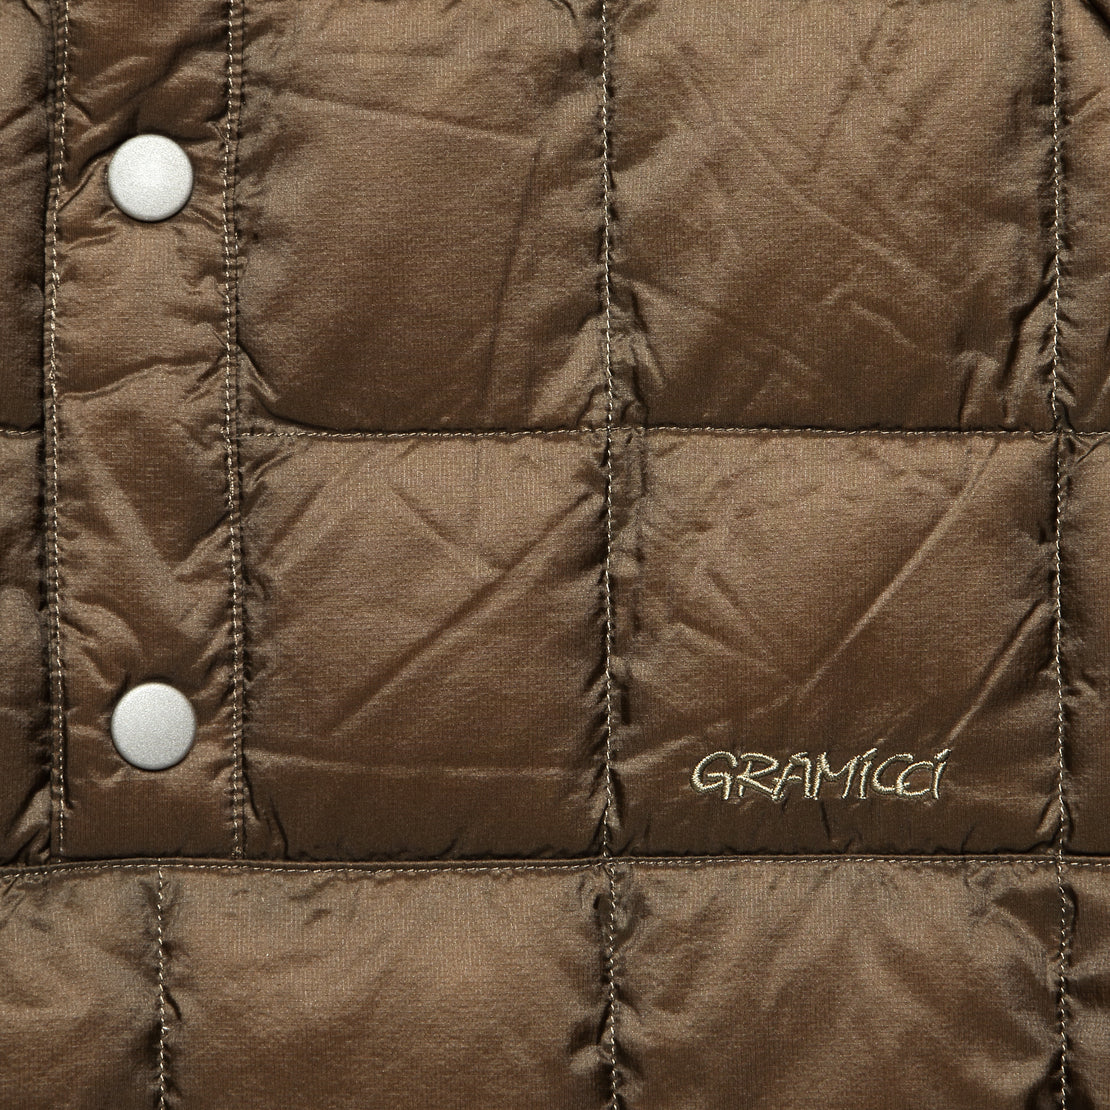 Down Pullover Jacket - Deep Olive - Gramicci - STAG Provisions - Outerwear - Coat / Jacket